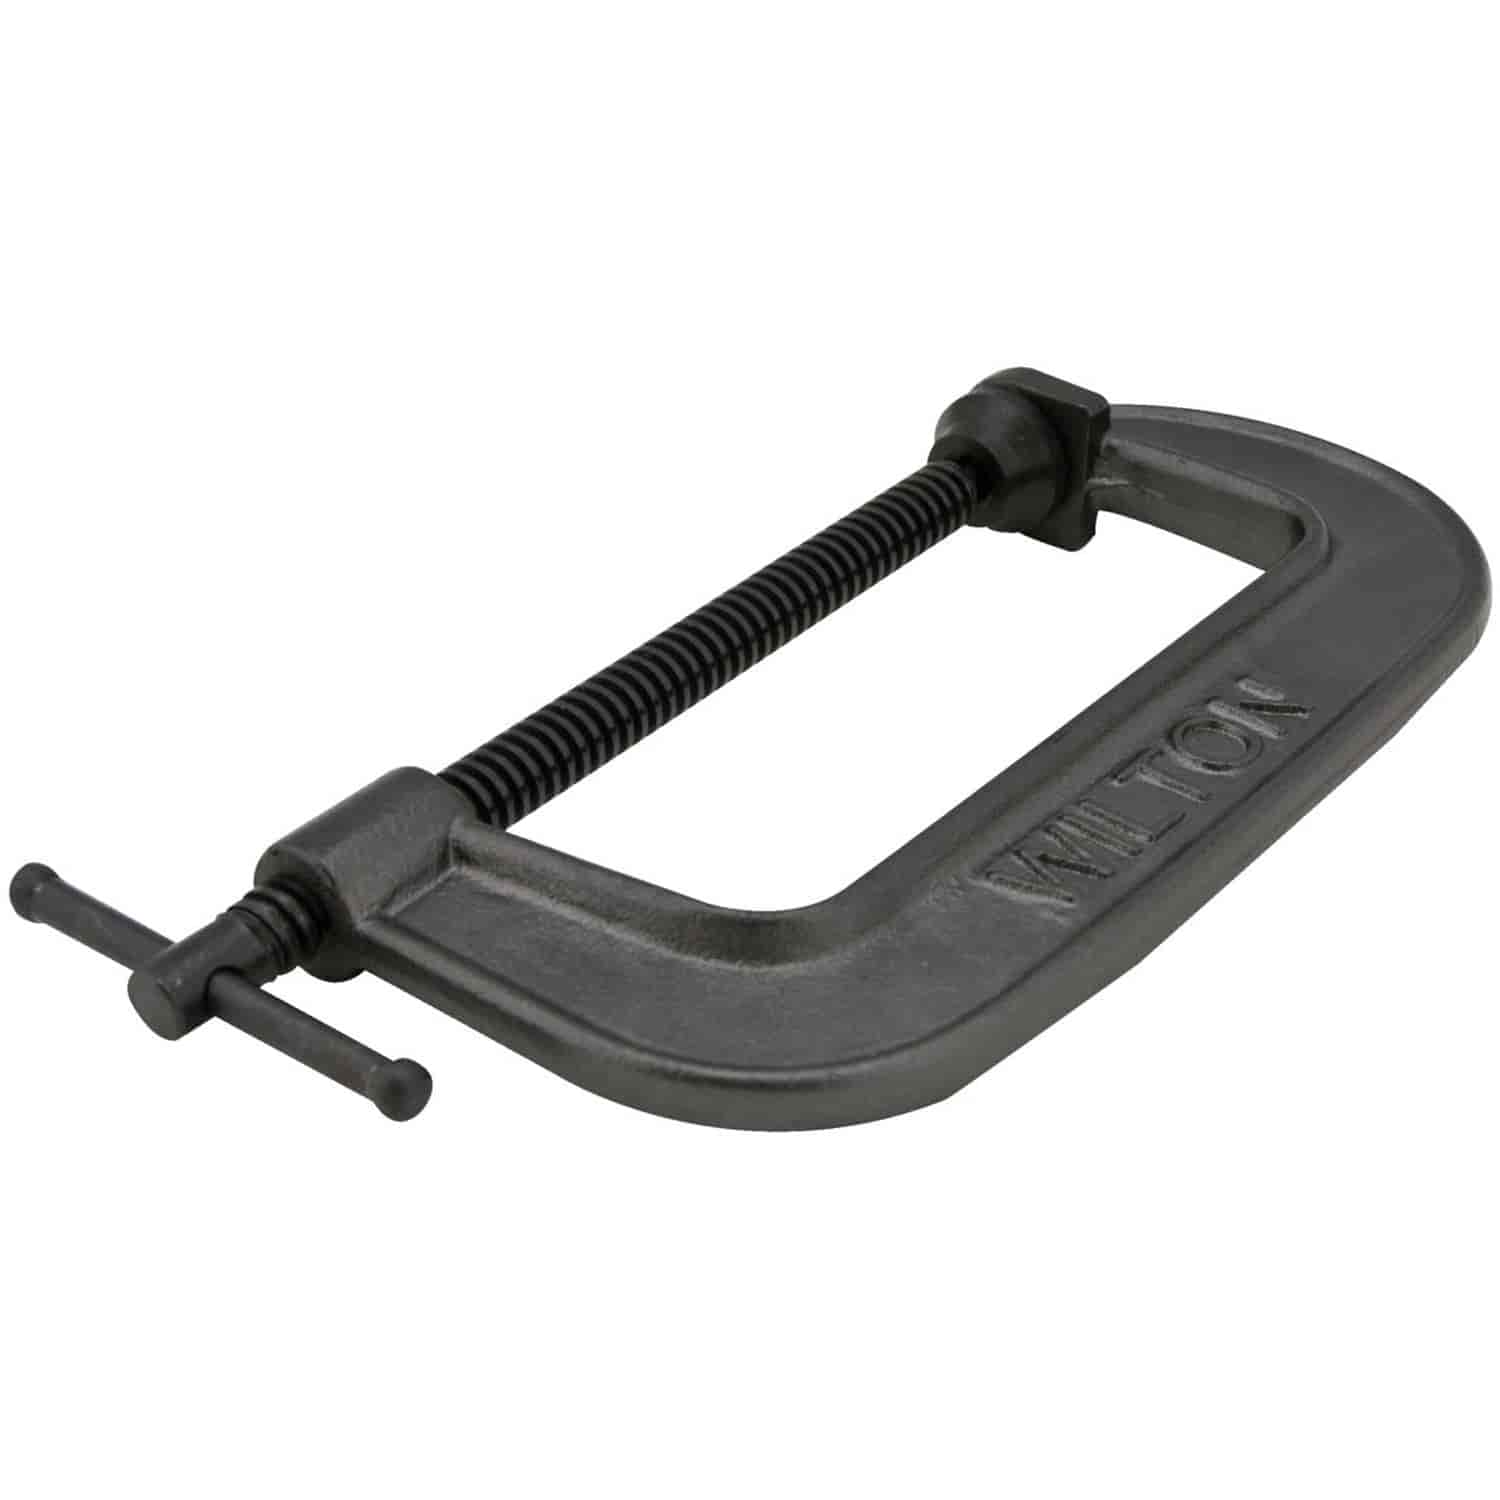 540A Series C-Clamp Opening Capacity Max: 2-1/2"